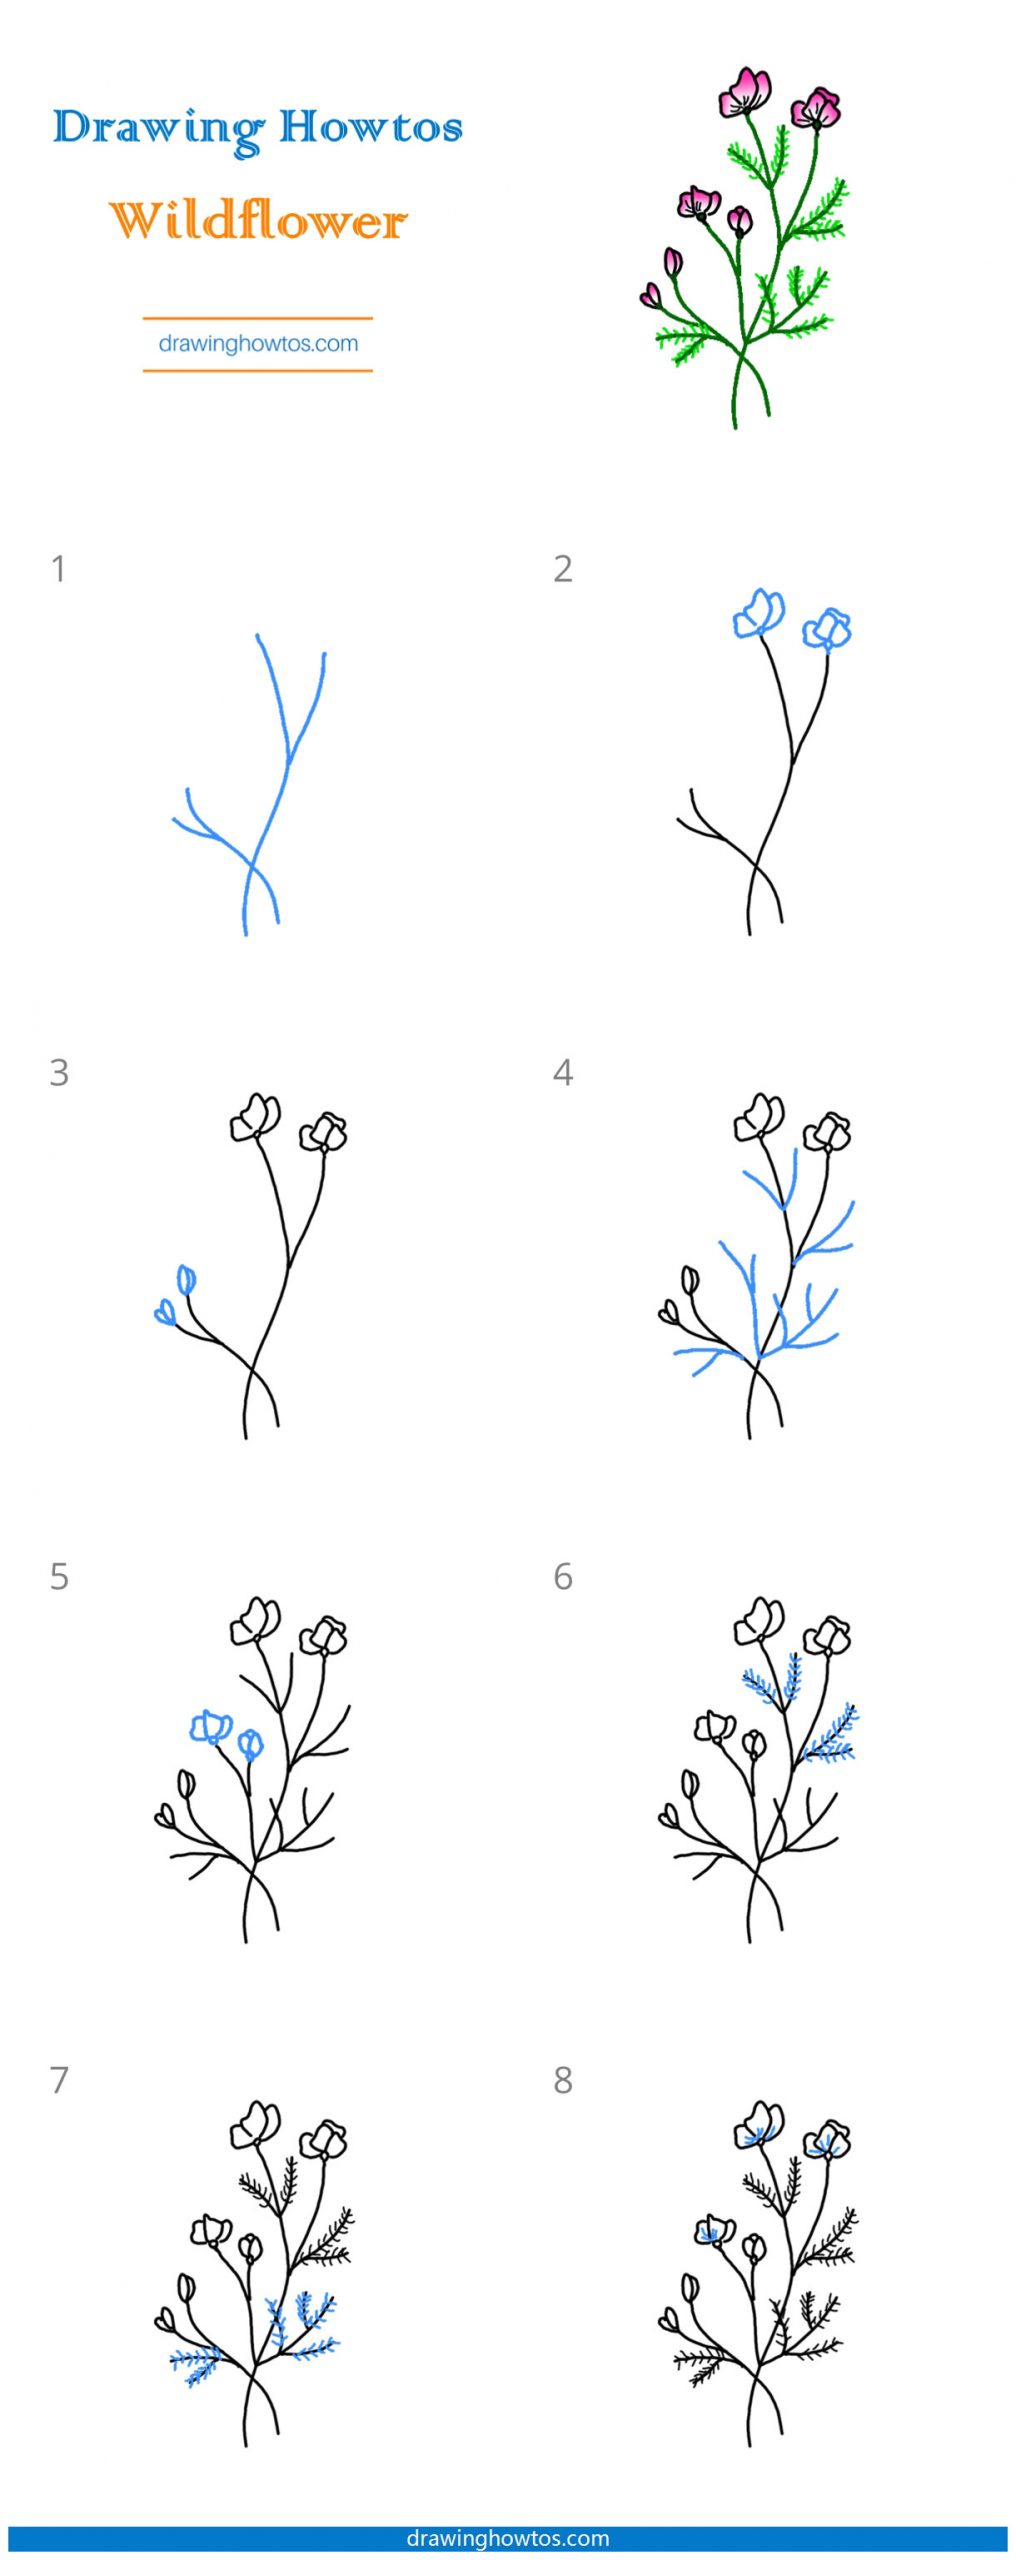 How to Draw Wildflowers Step by Step